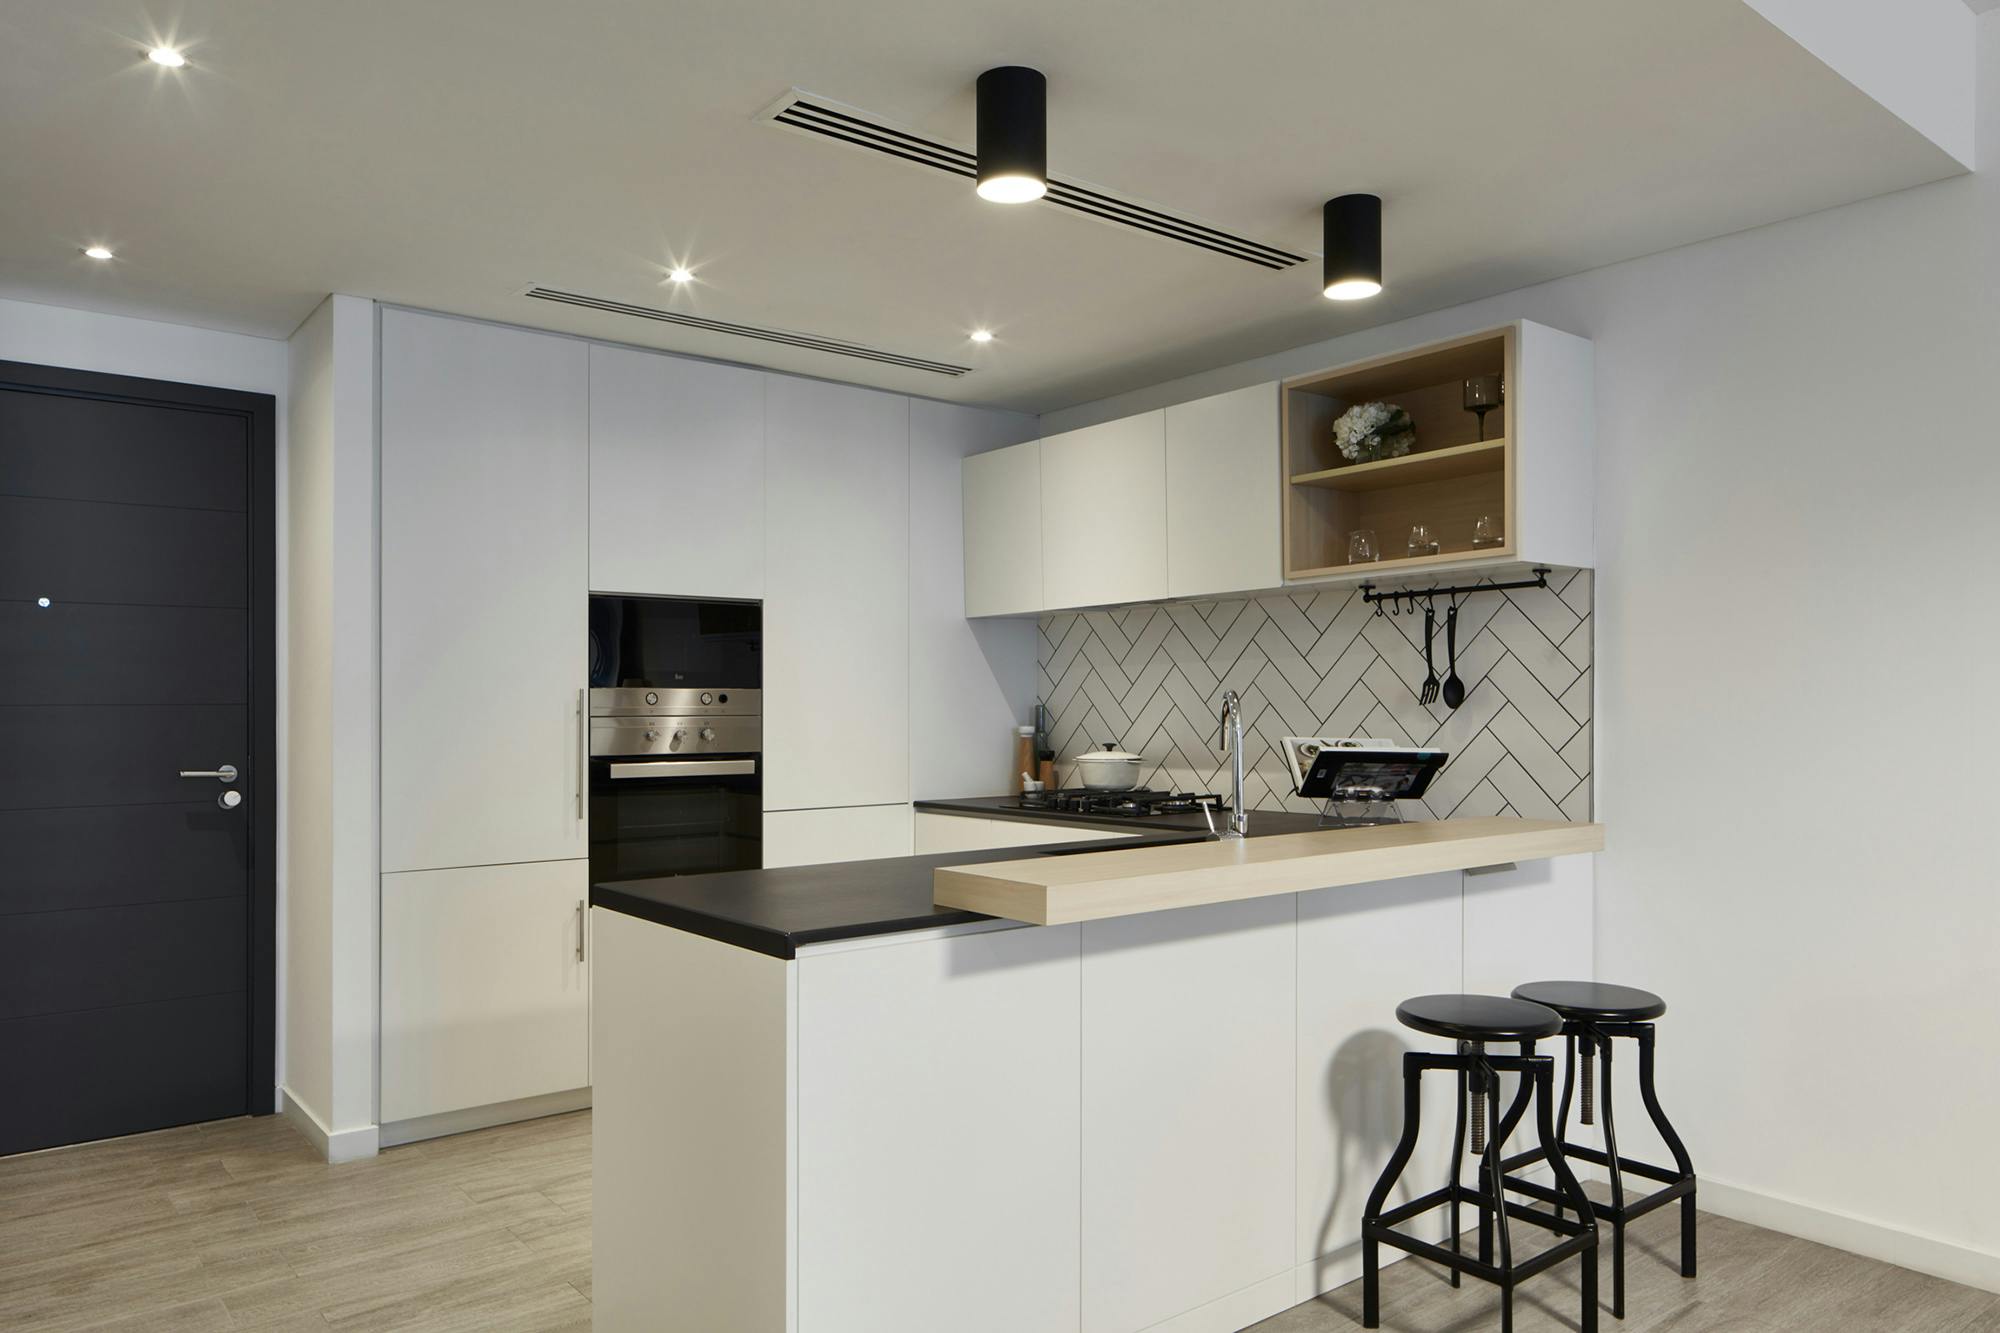 Numéro d'image 32 de la section actuelle de DKTN Sirius adds a welcoming touch to the kitchens of a residential development in Dubai de Cosentino France